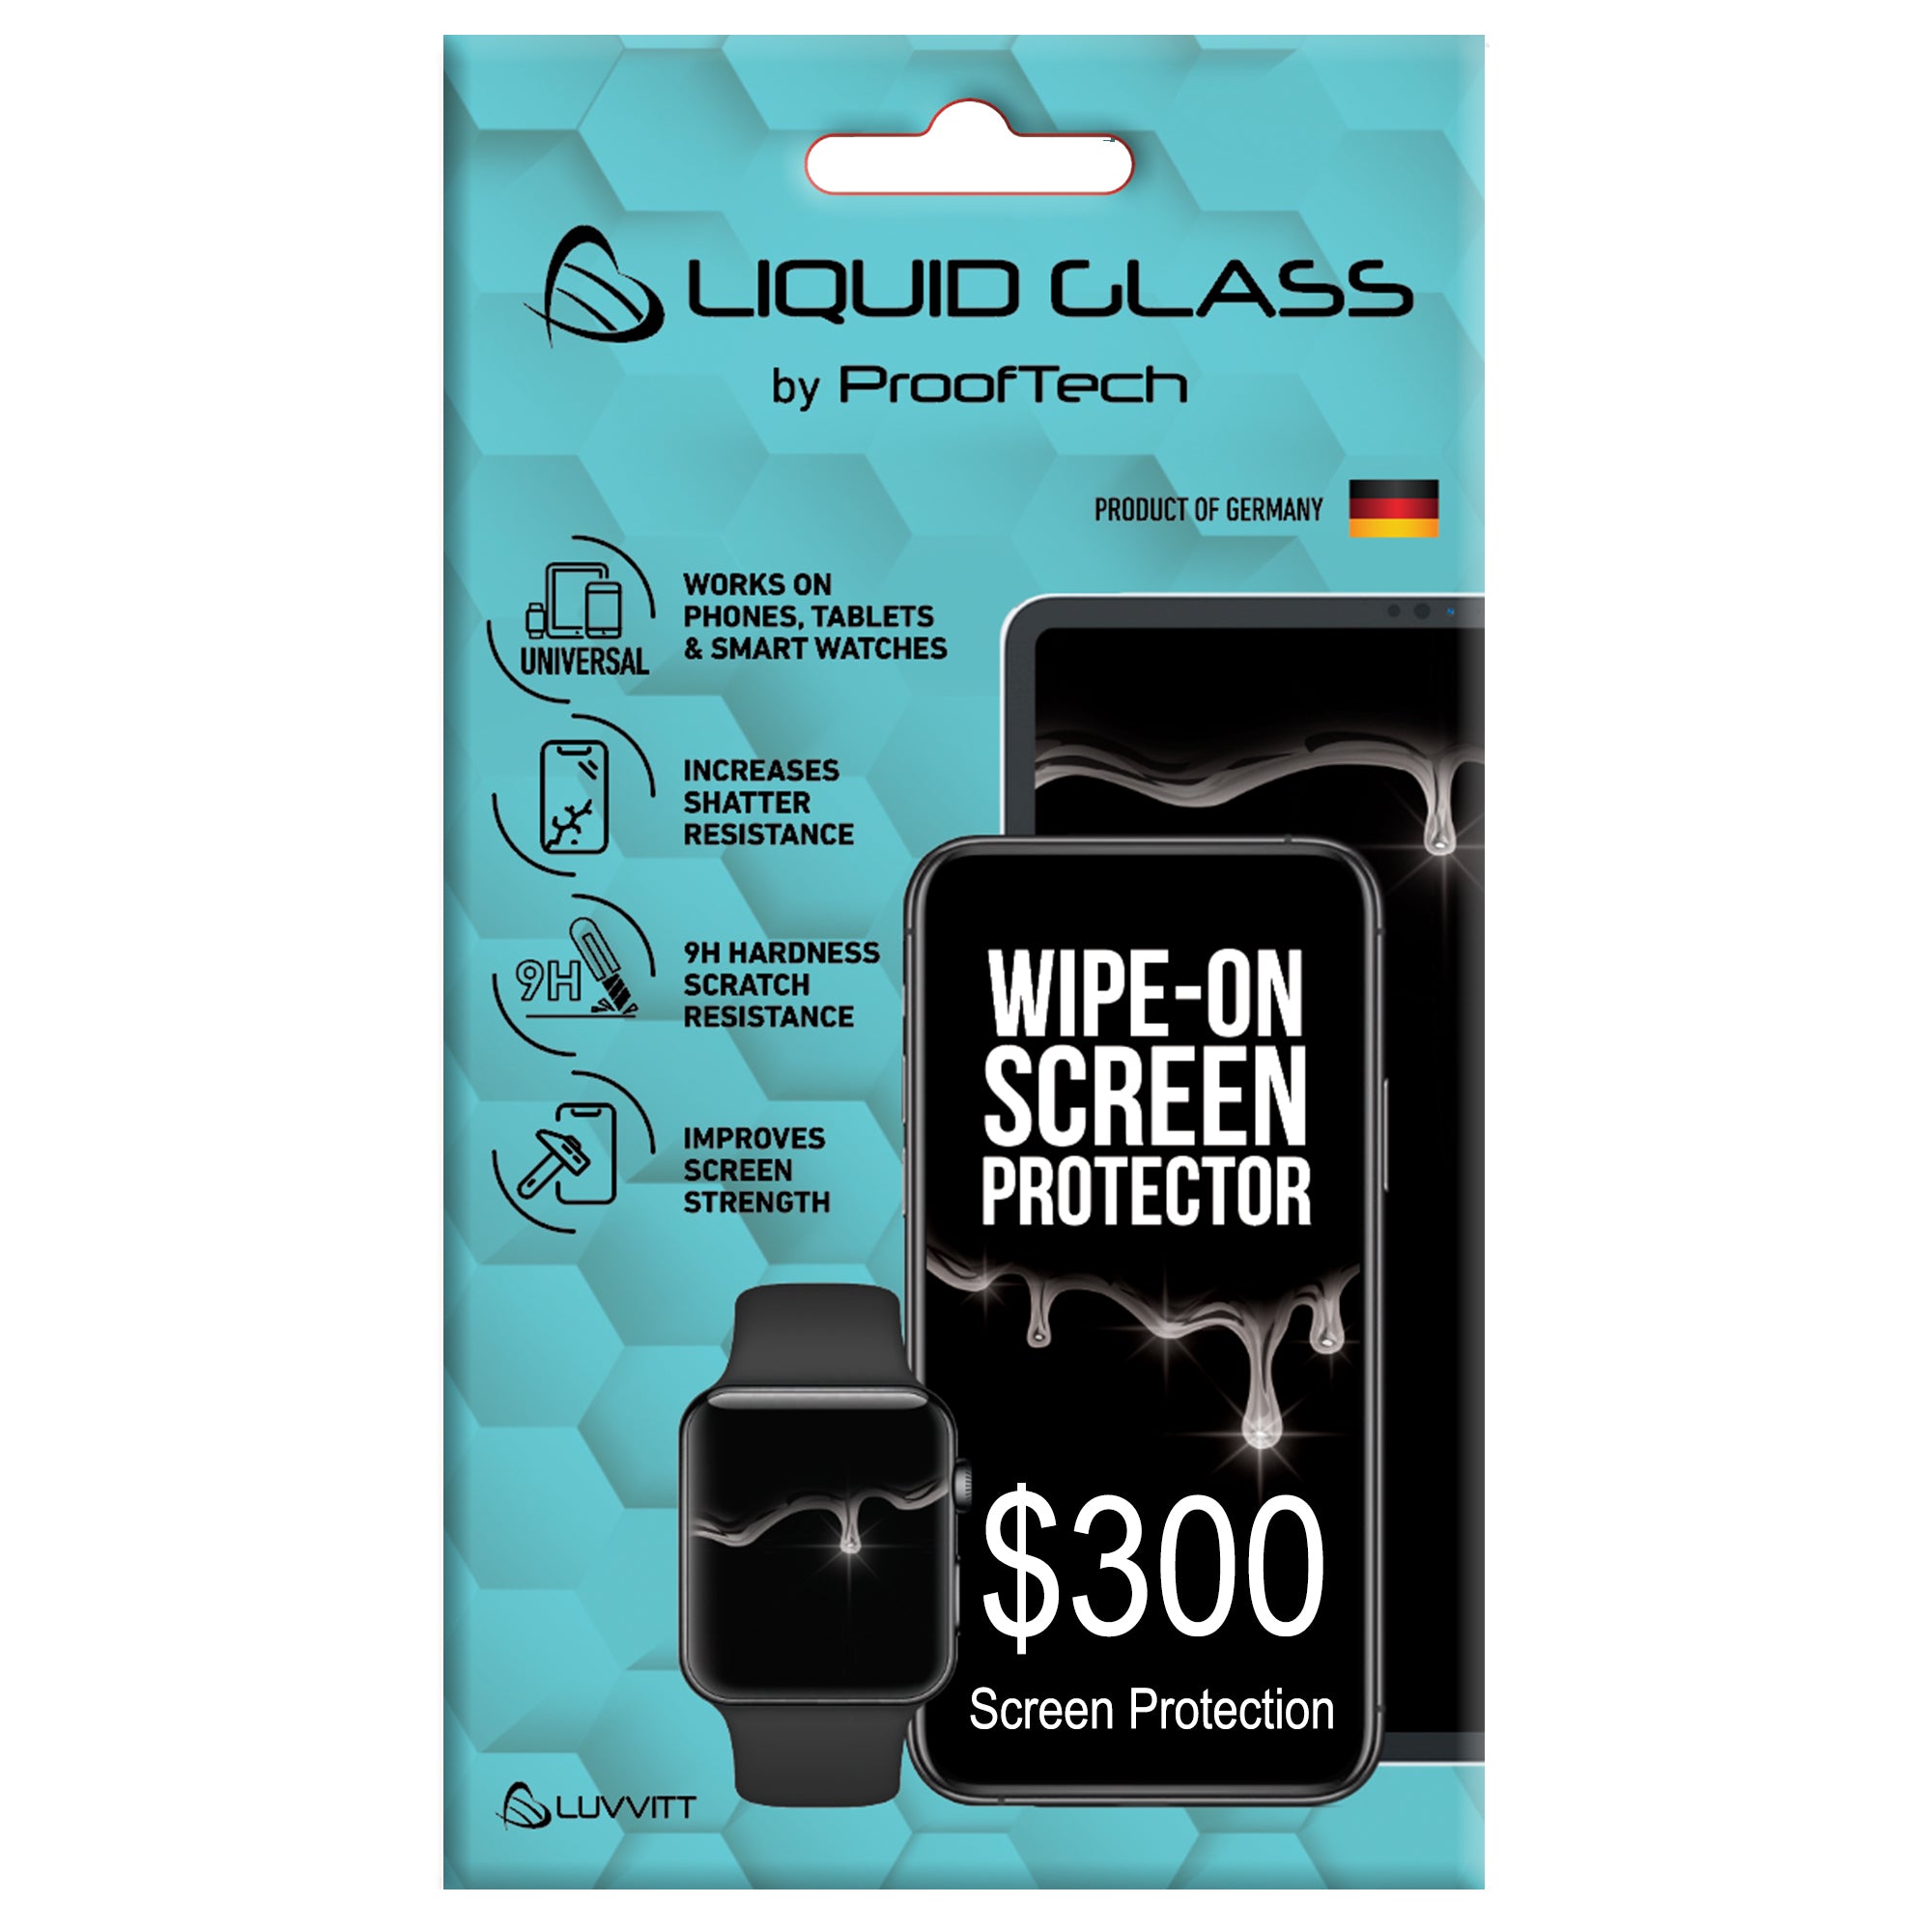 Liquid Glass Screen Protector with $300 Screen Protection Guarantee - Universal